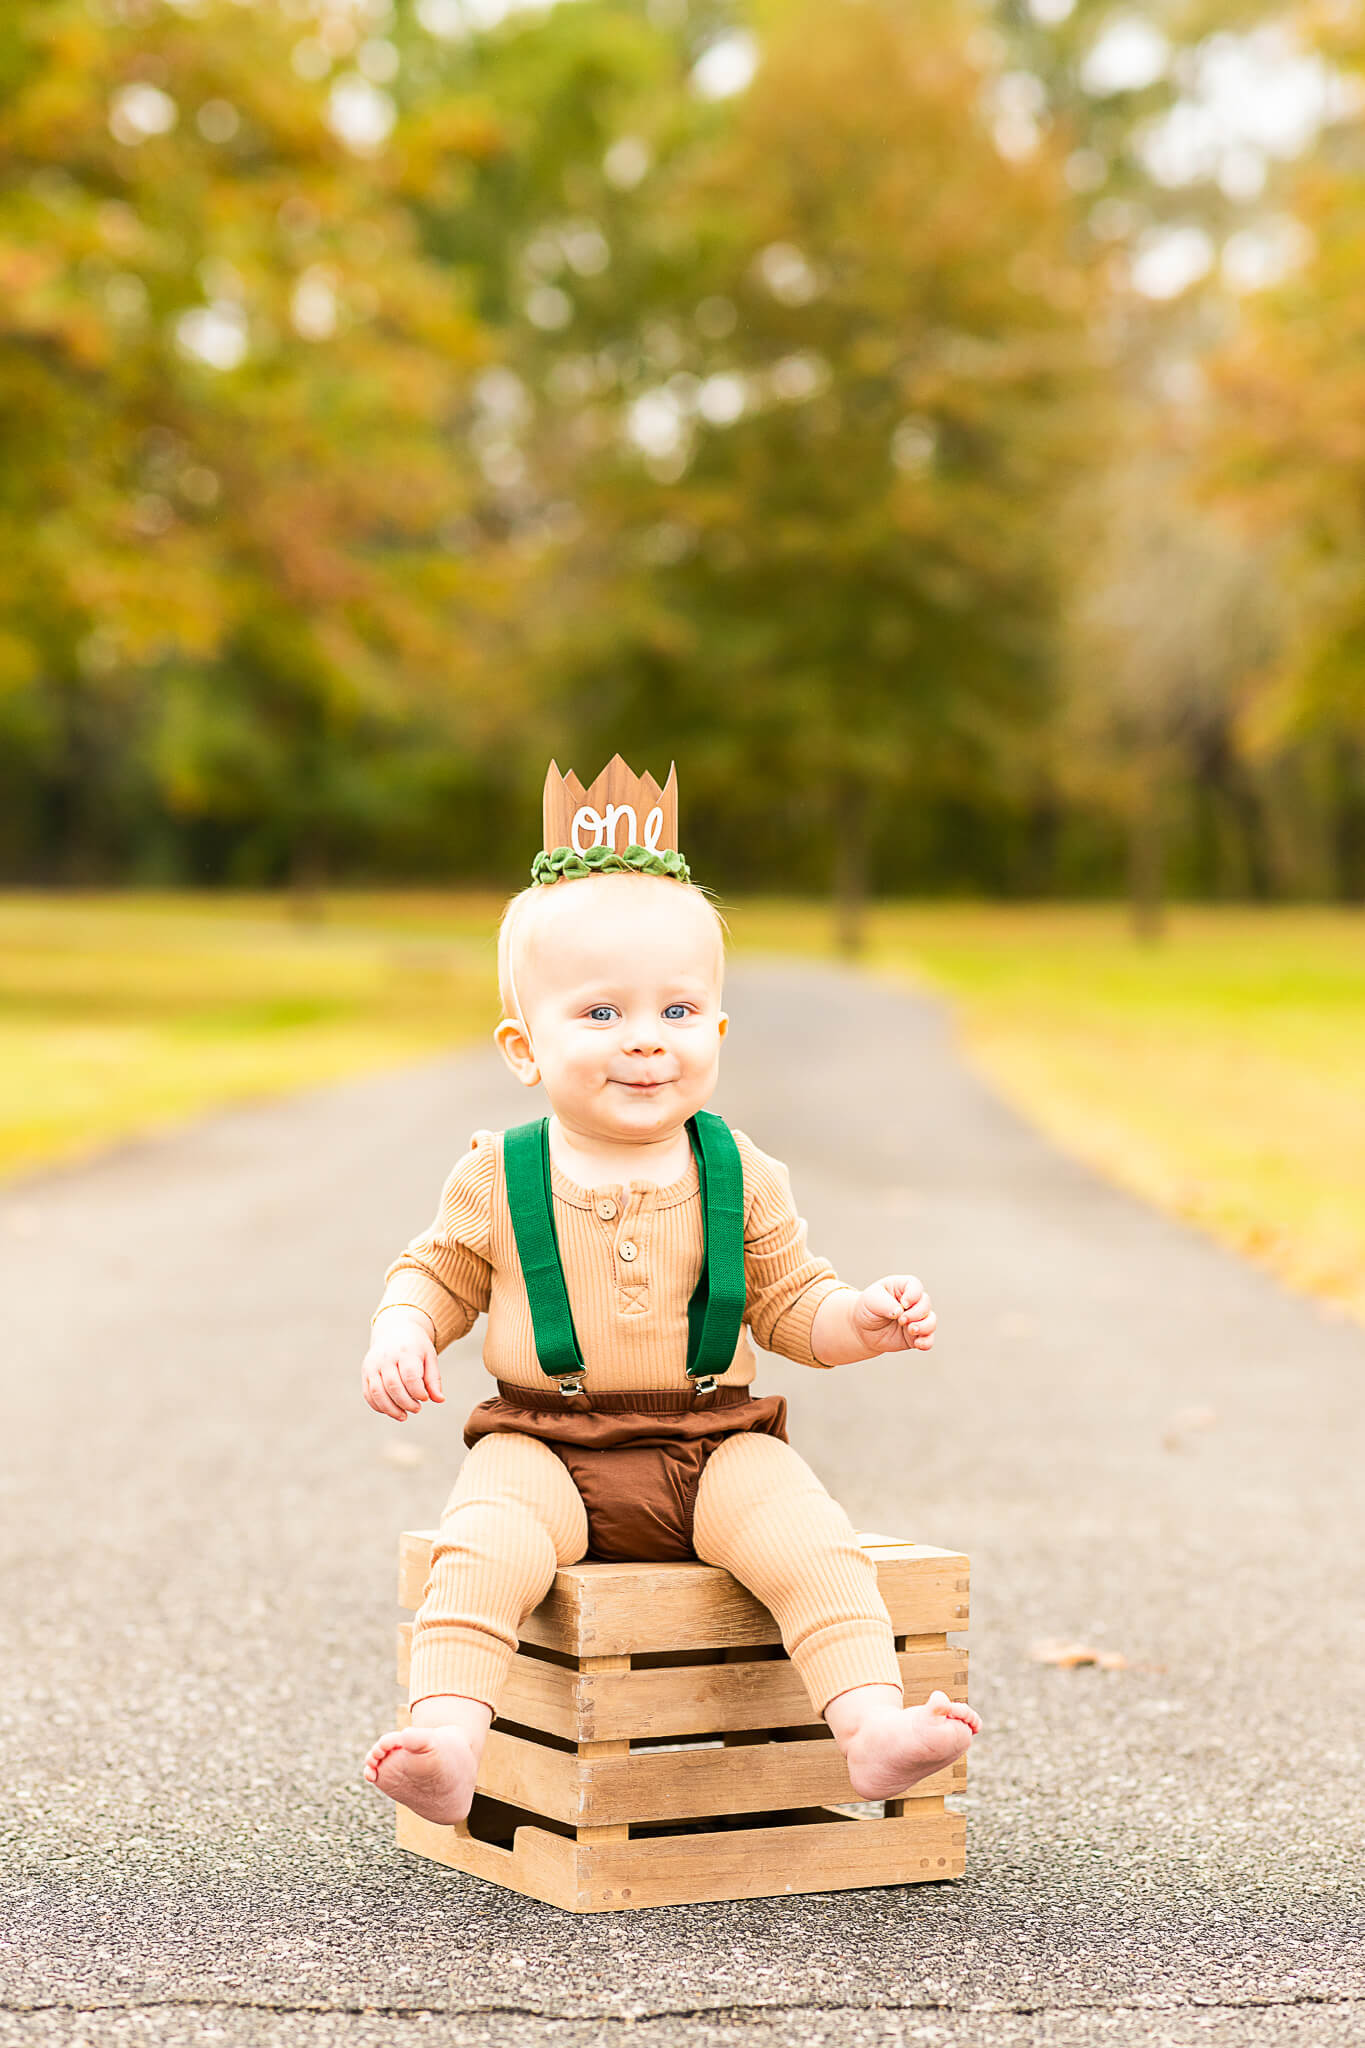 One year old boy sits on a wooden crate with a birthday hat in a park path